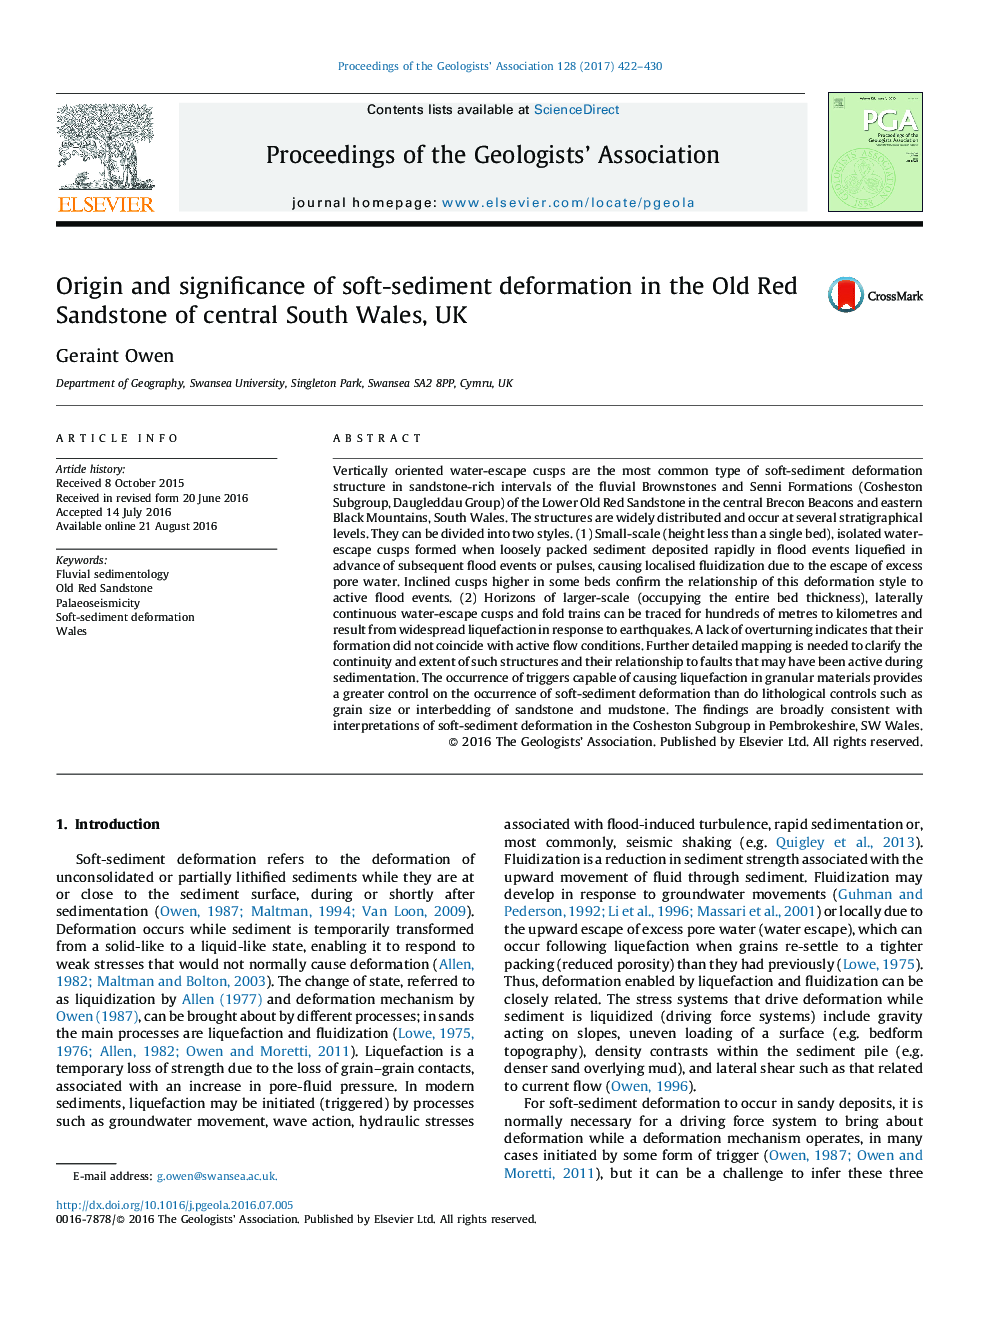 Origin and significance of soft-sediment deformation in the Old Red Sandstone of central South Wales, UK